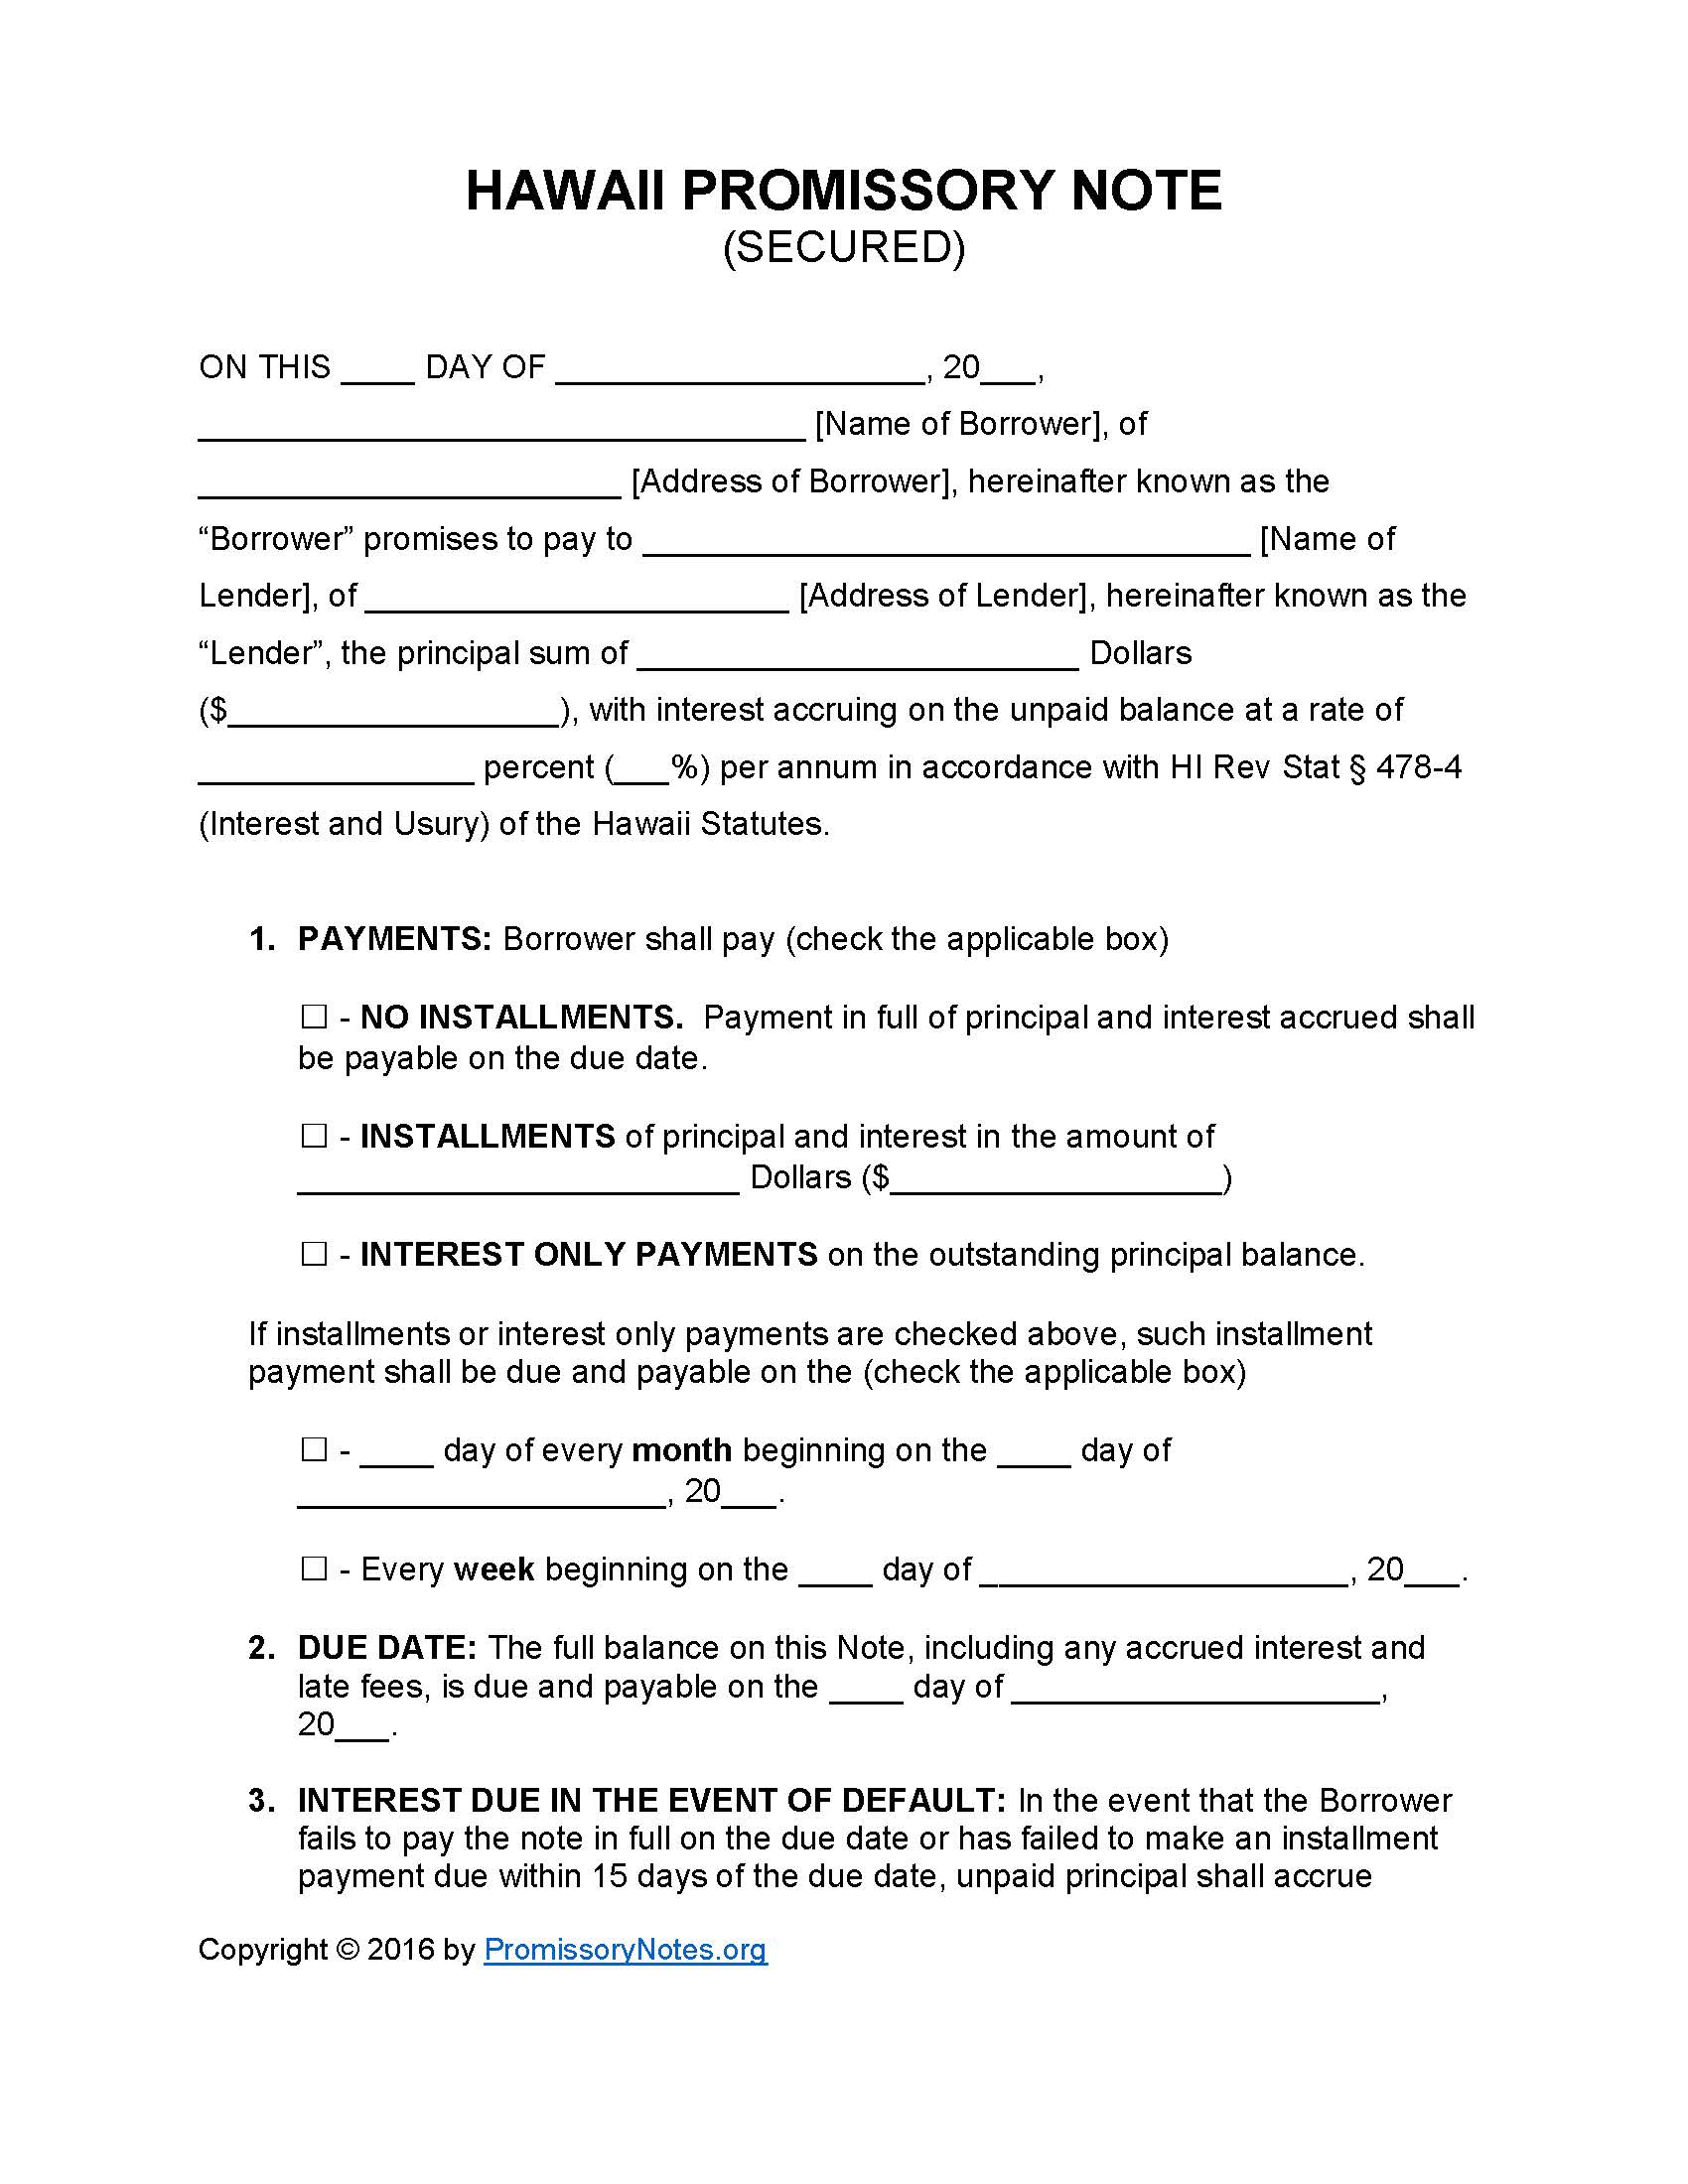 hawaii-secured-promissory-note-form